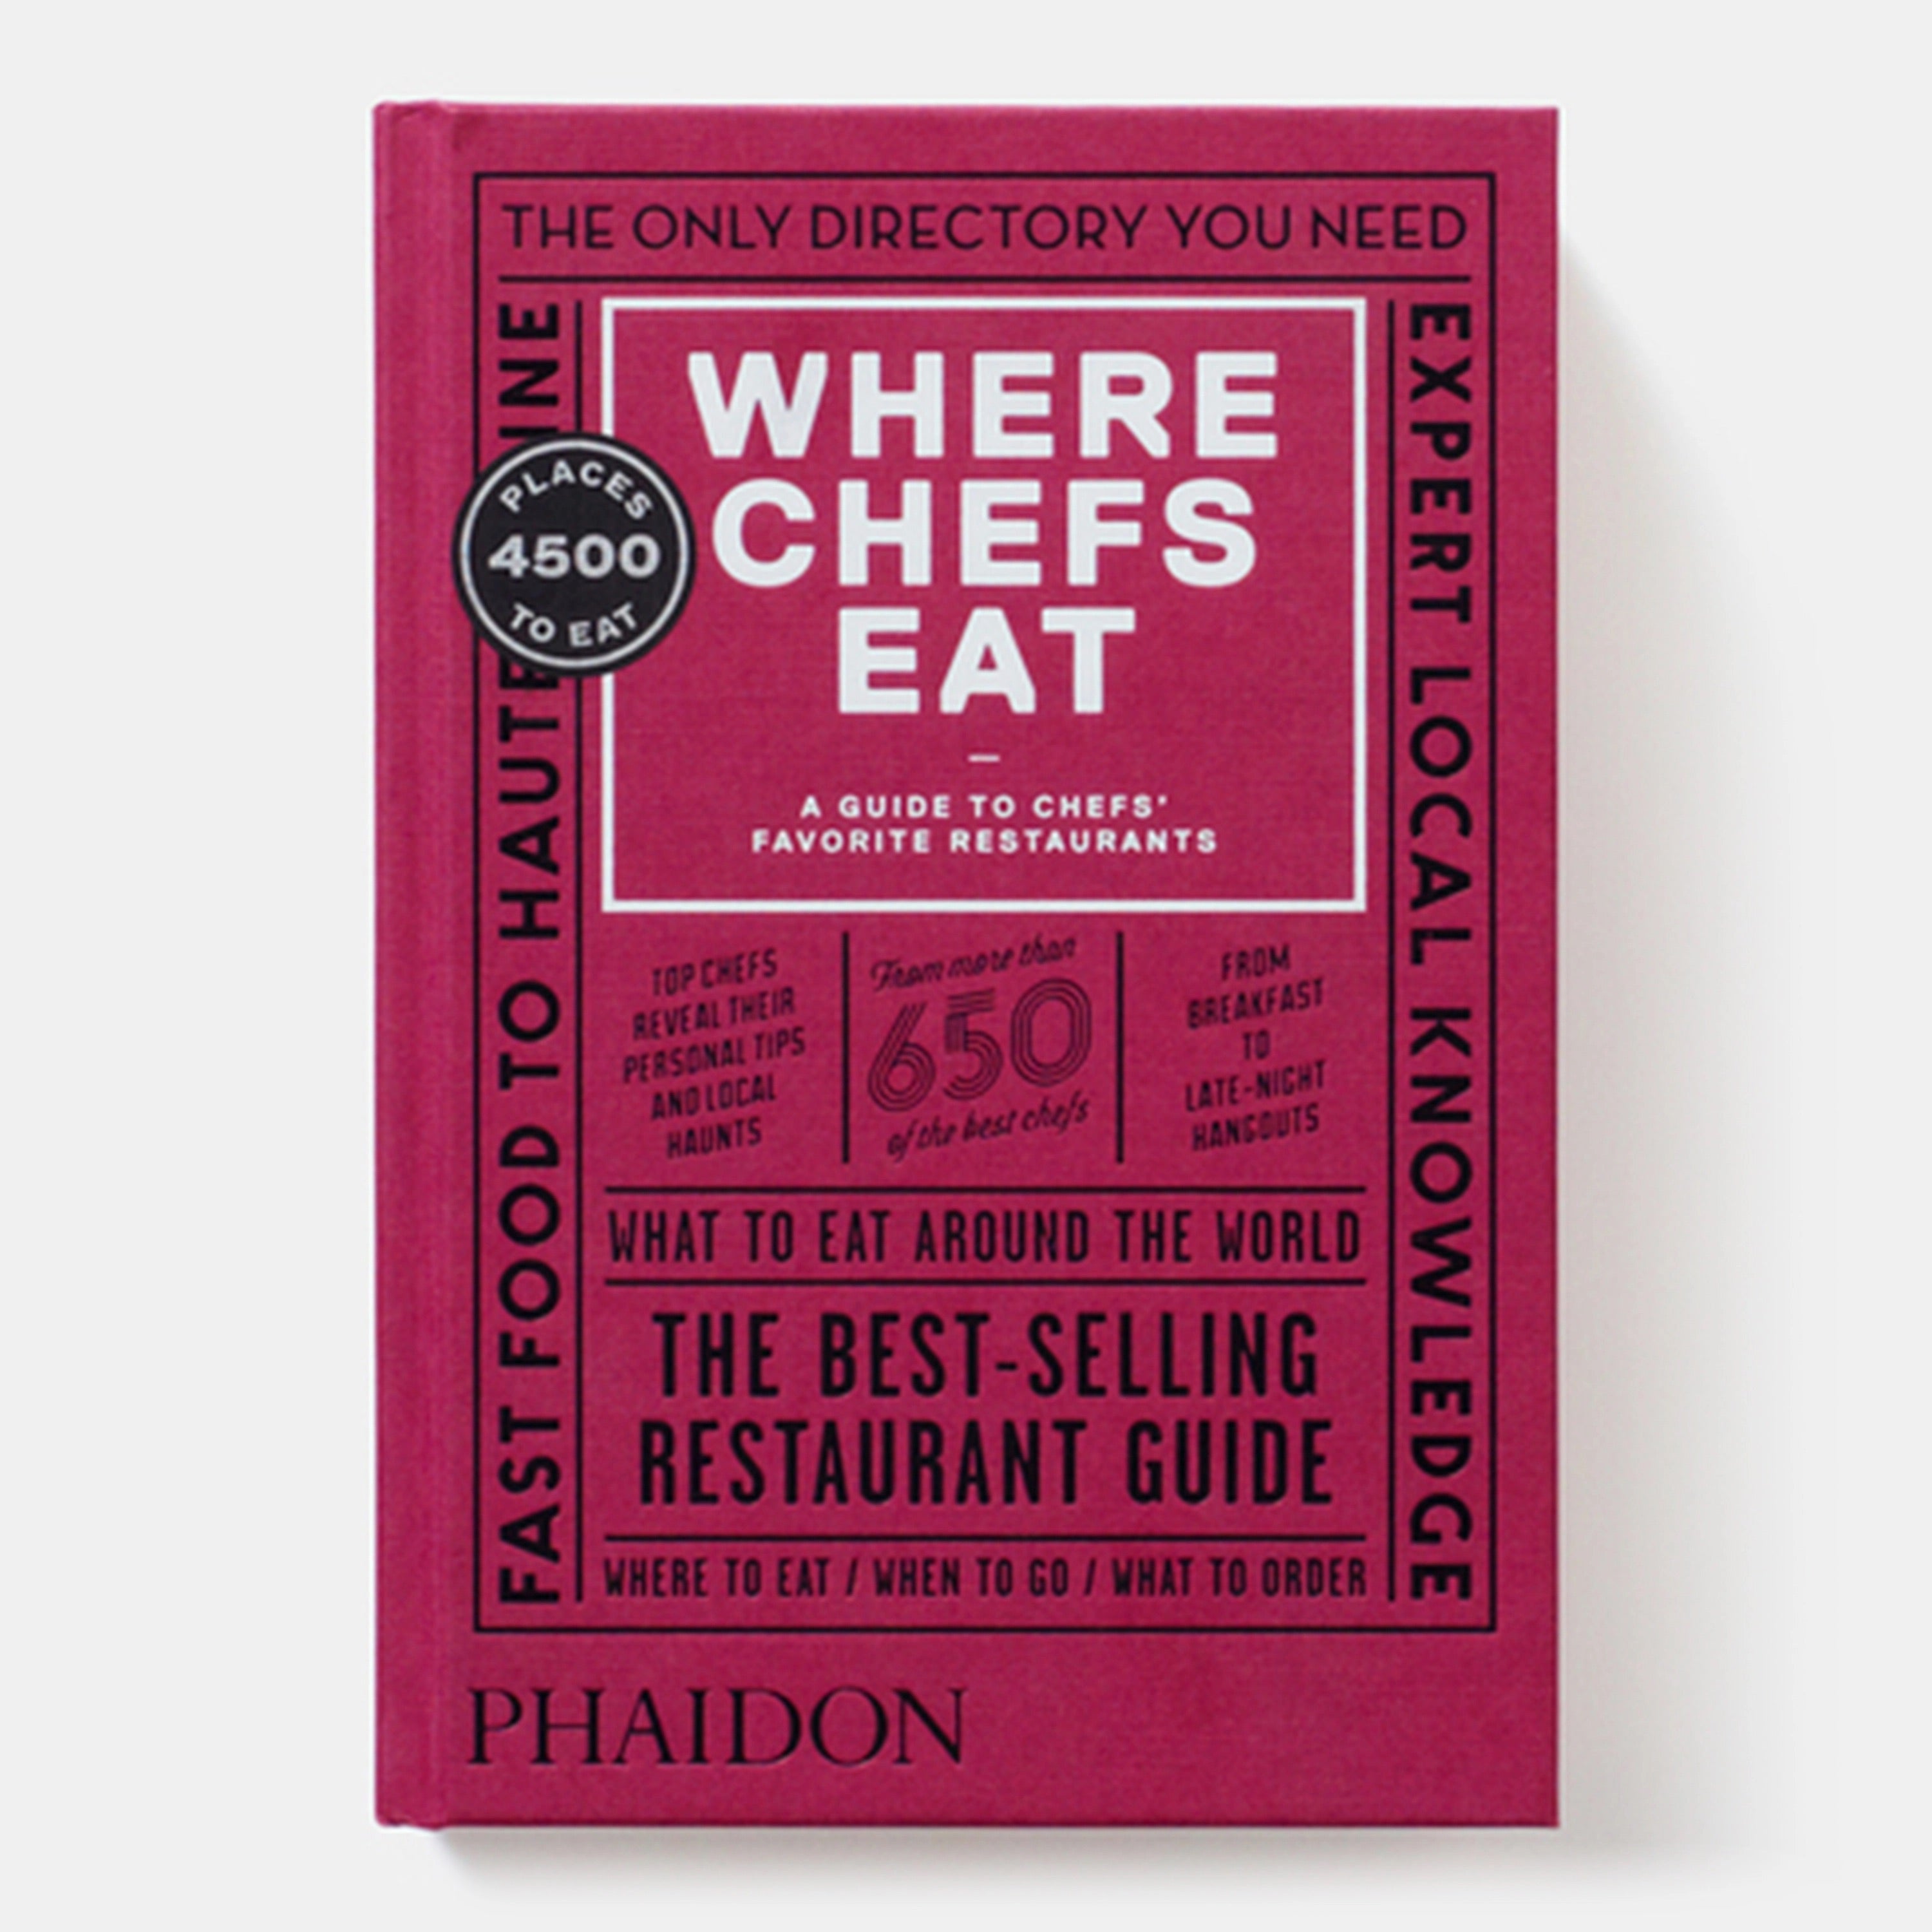 WHERE CHEFS EAT: A GUIDE TO CHEFS' FAVORITE RESTAURANTS